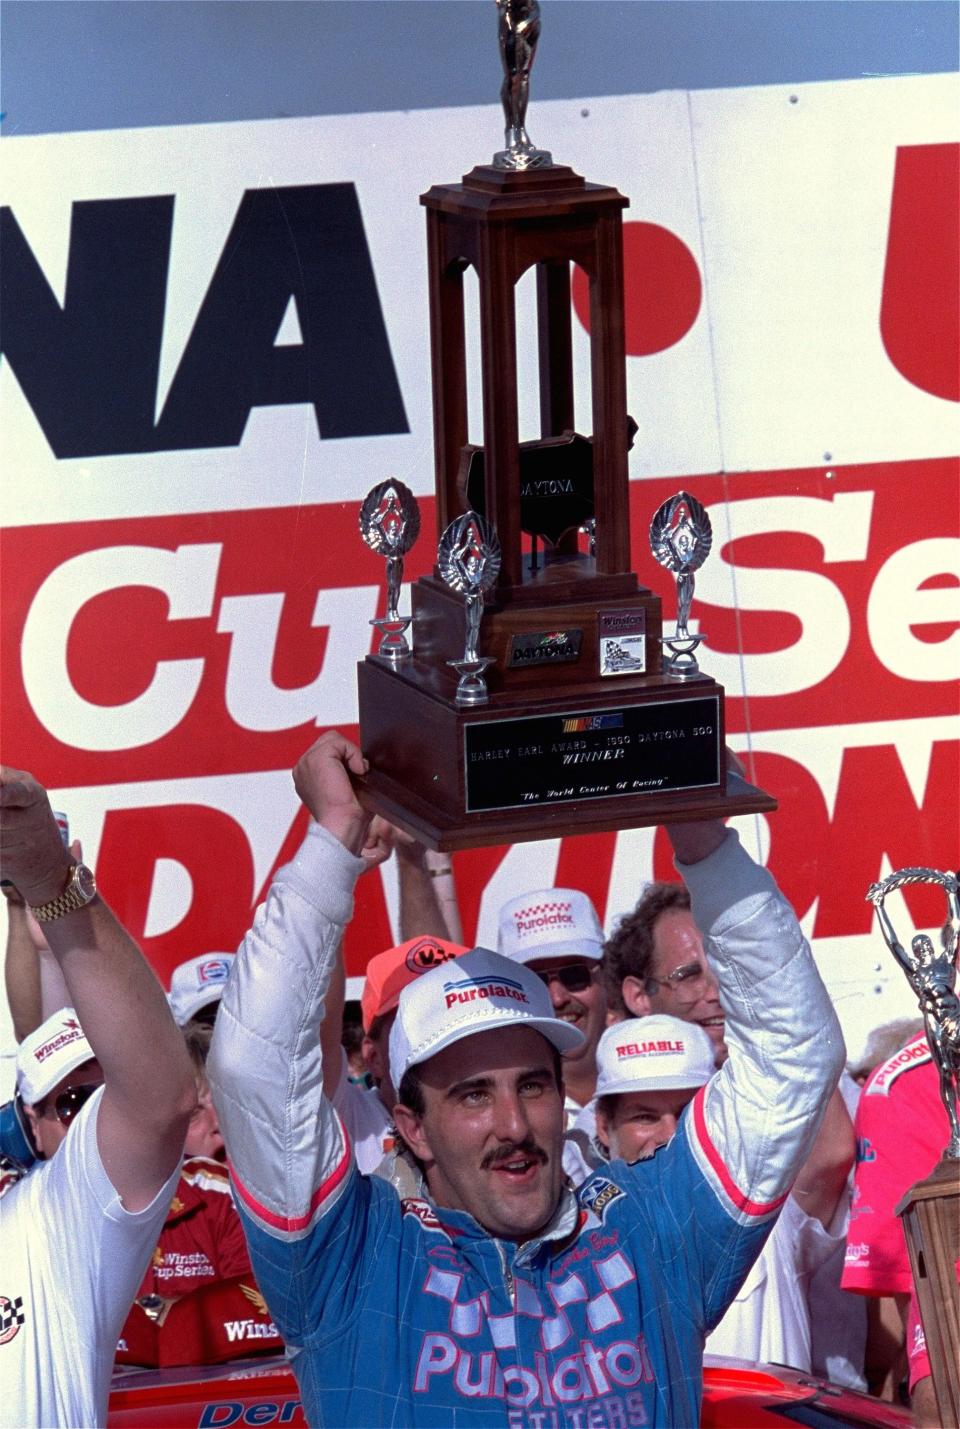 Derrike Cope improbably emerged the winner of the 1990 Daytona 500 after Dale Earnhardt shredded a right rear tire on the final lap.